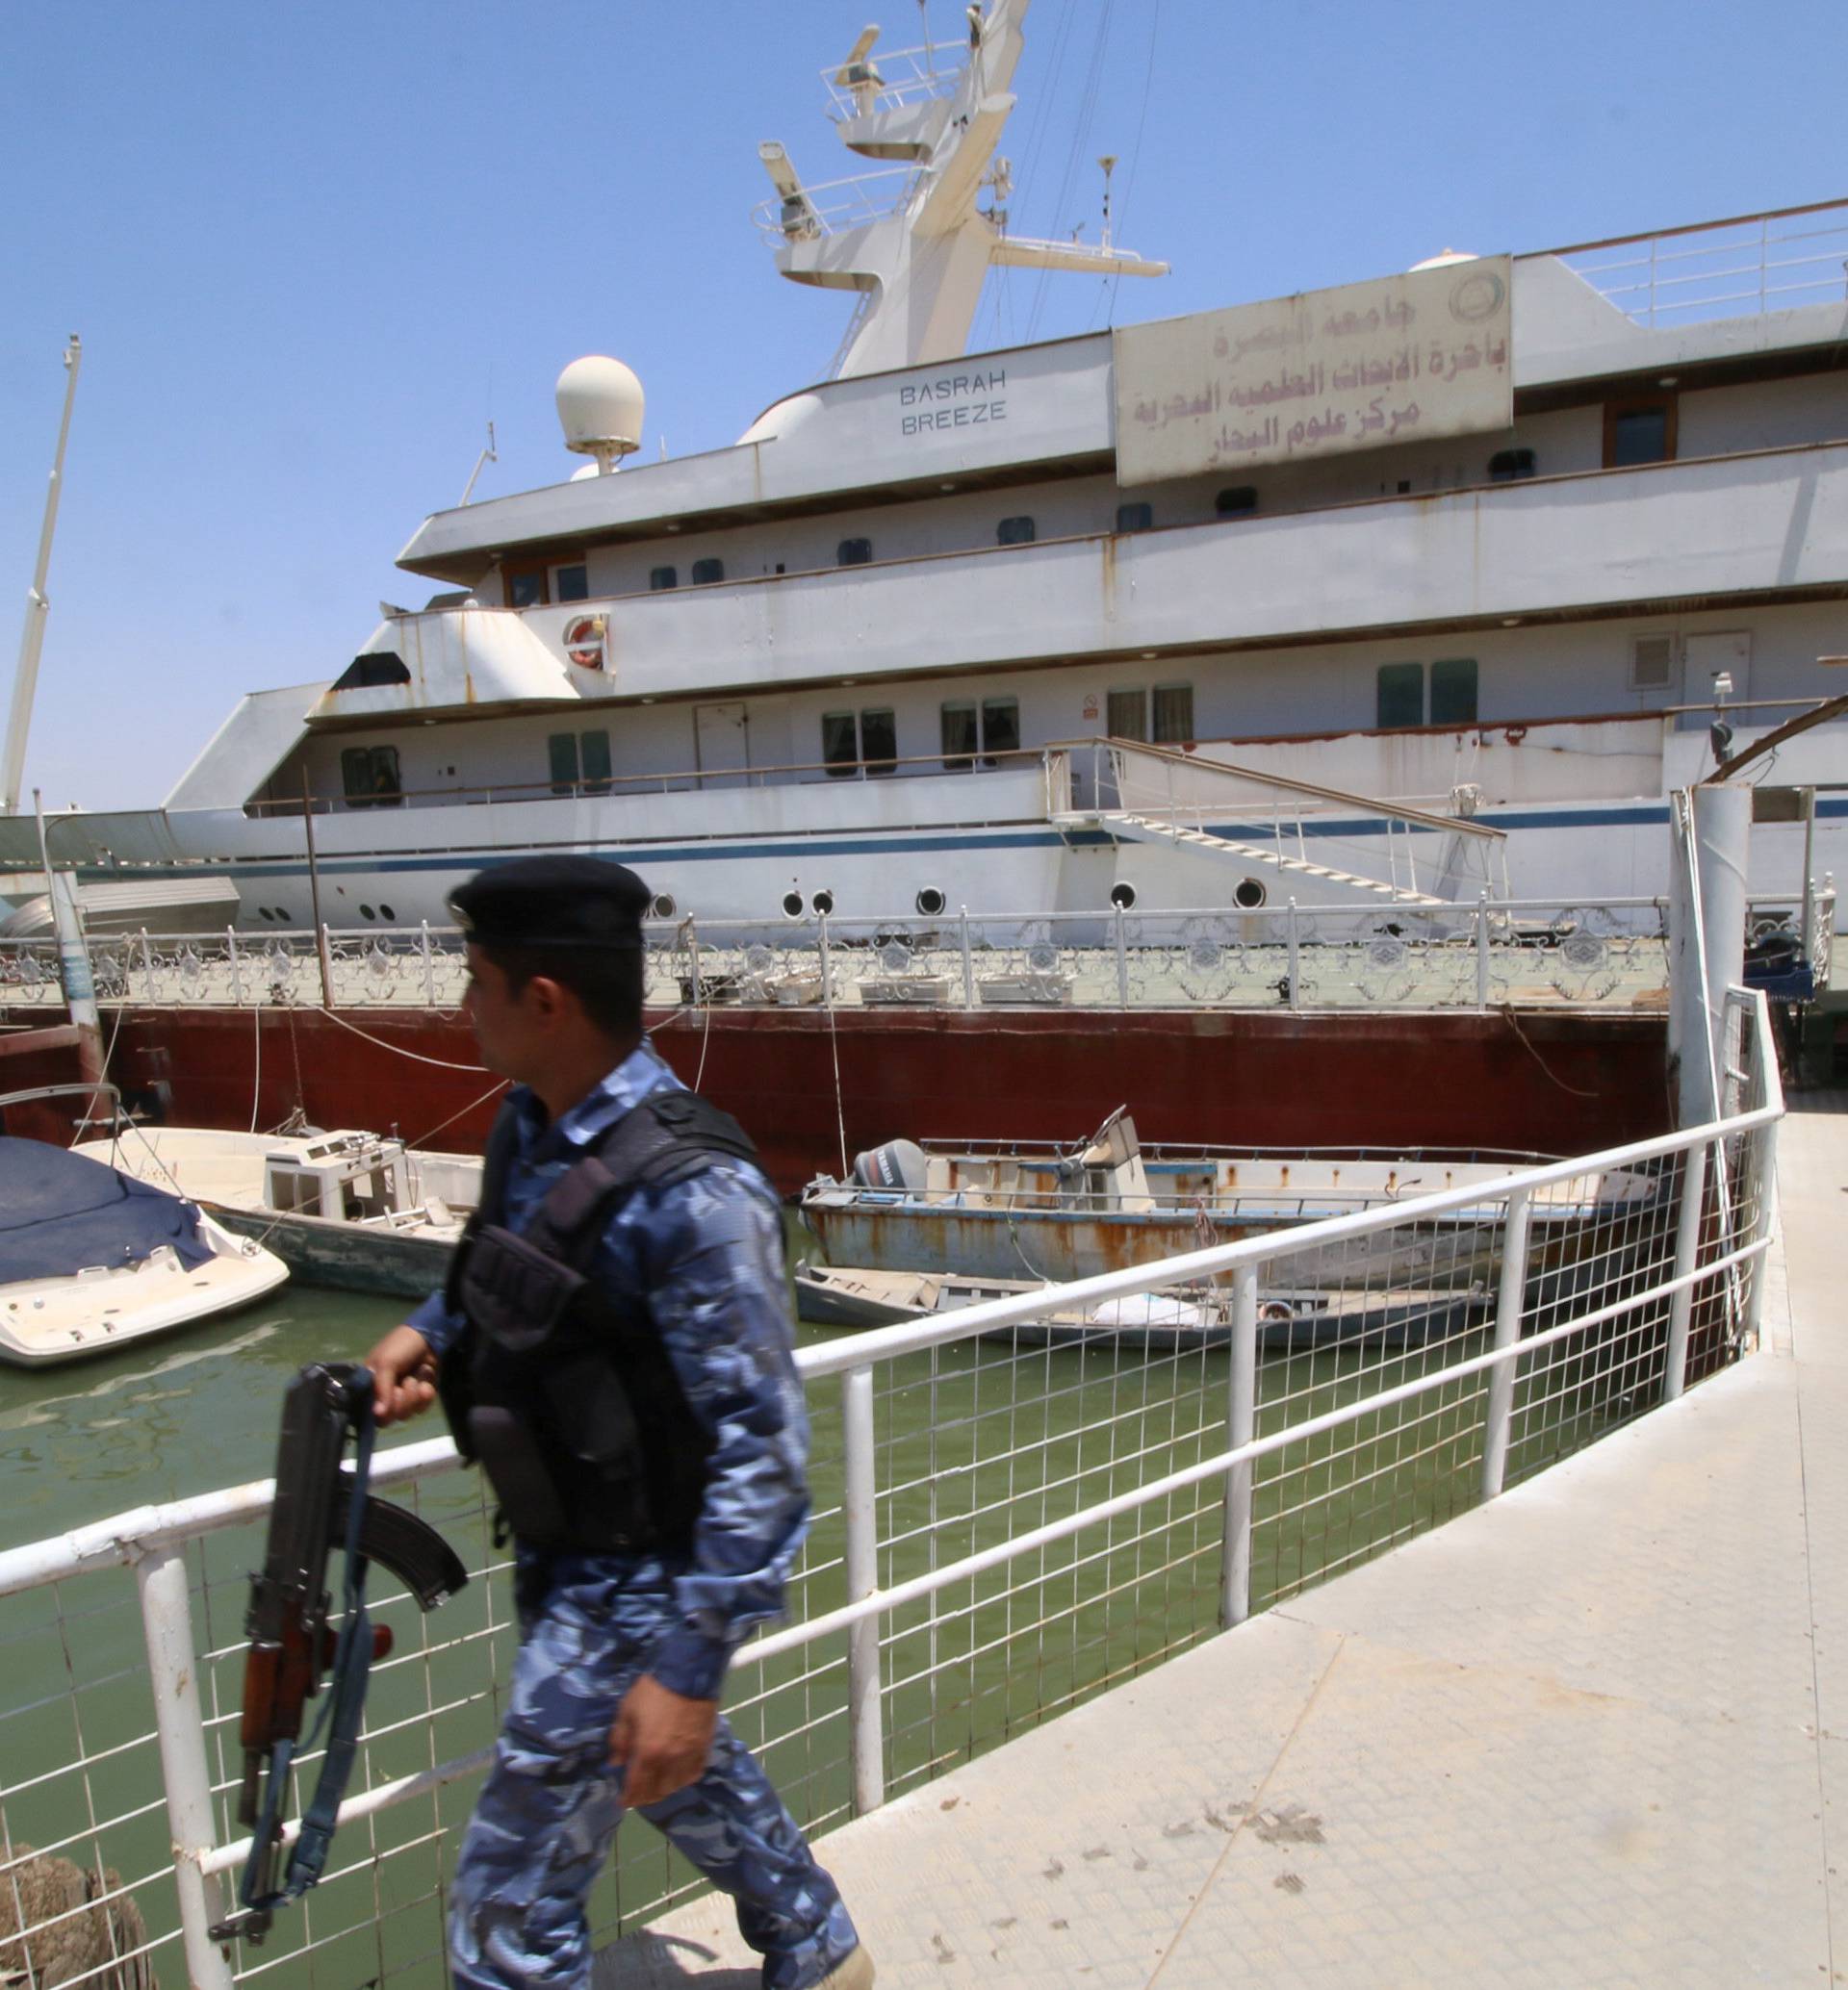 An Iraqi policeman walks past the yacht called "Basrah Breeze", once owned by former Iraqi president Saddam Hussein, who was toppled in a U.S.-led invasion in 2003, in the southern port of Basra